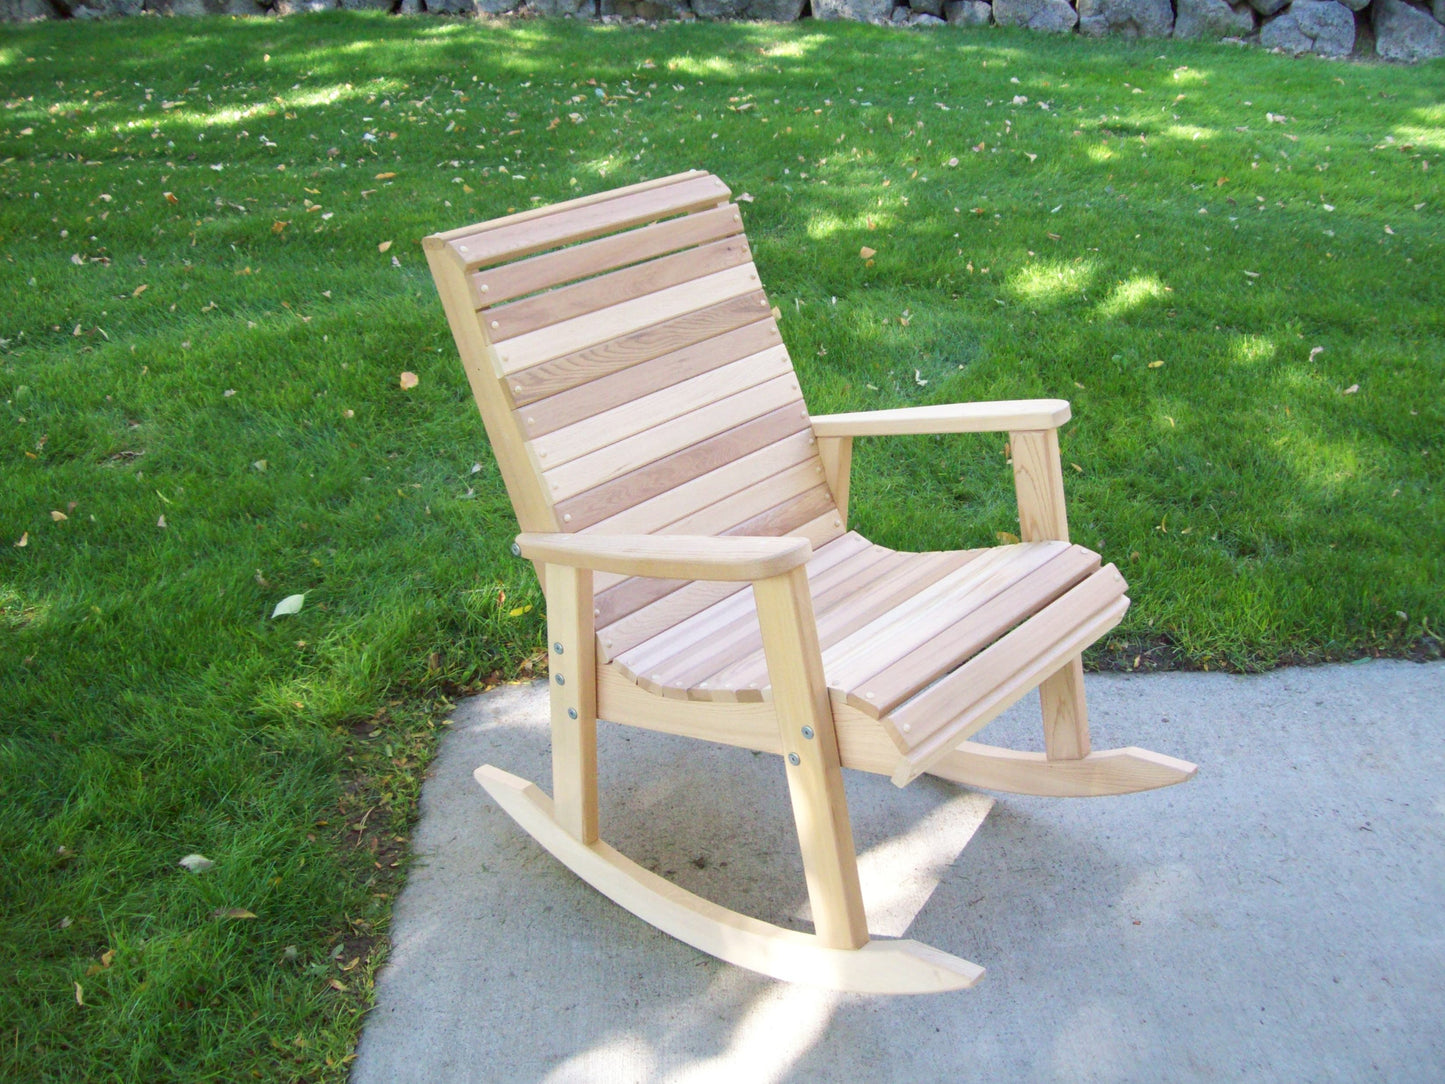 Wood Country T&L Rocking Chair - Welcome to Yardify - 2